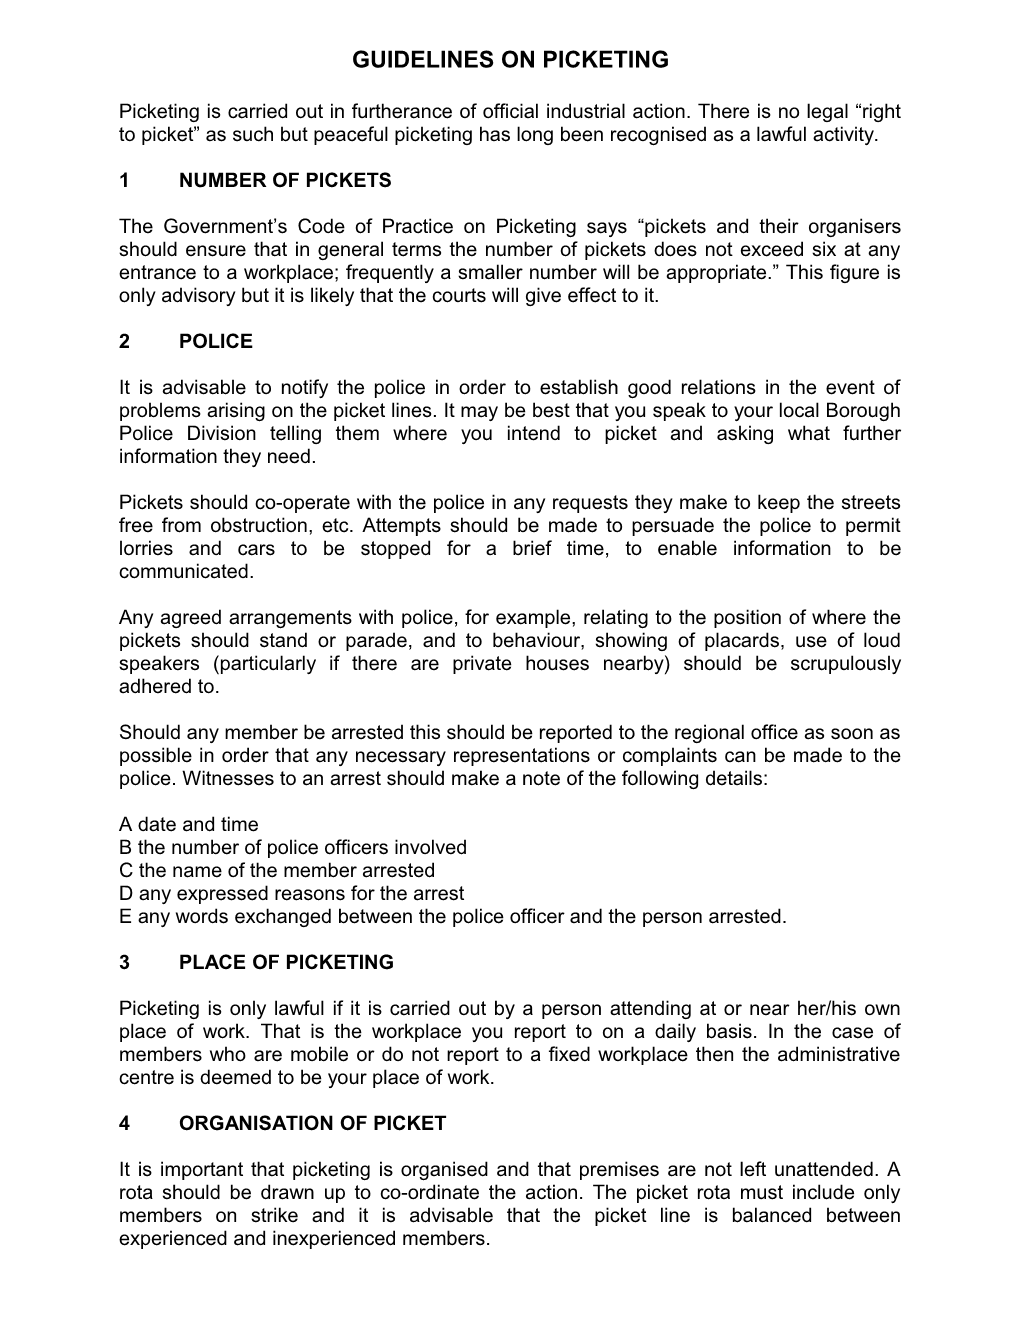 Guidelines on Picketing